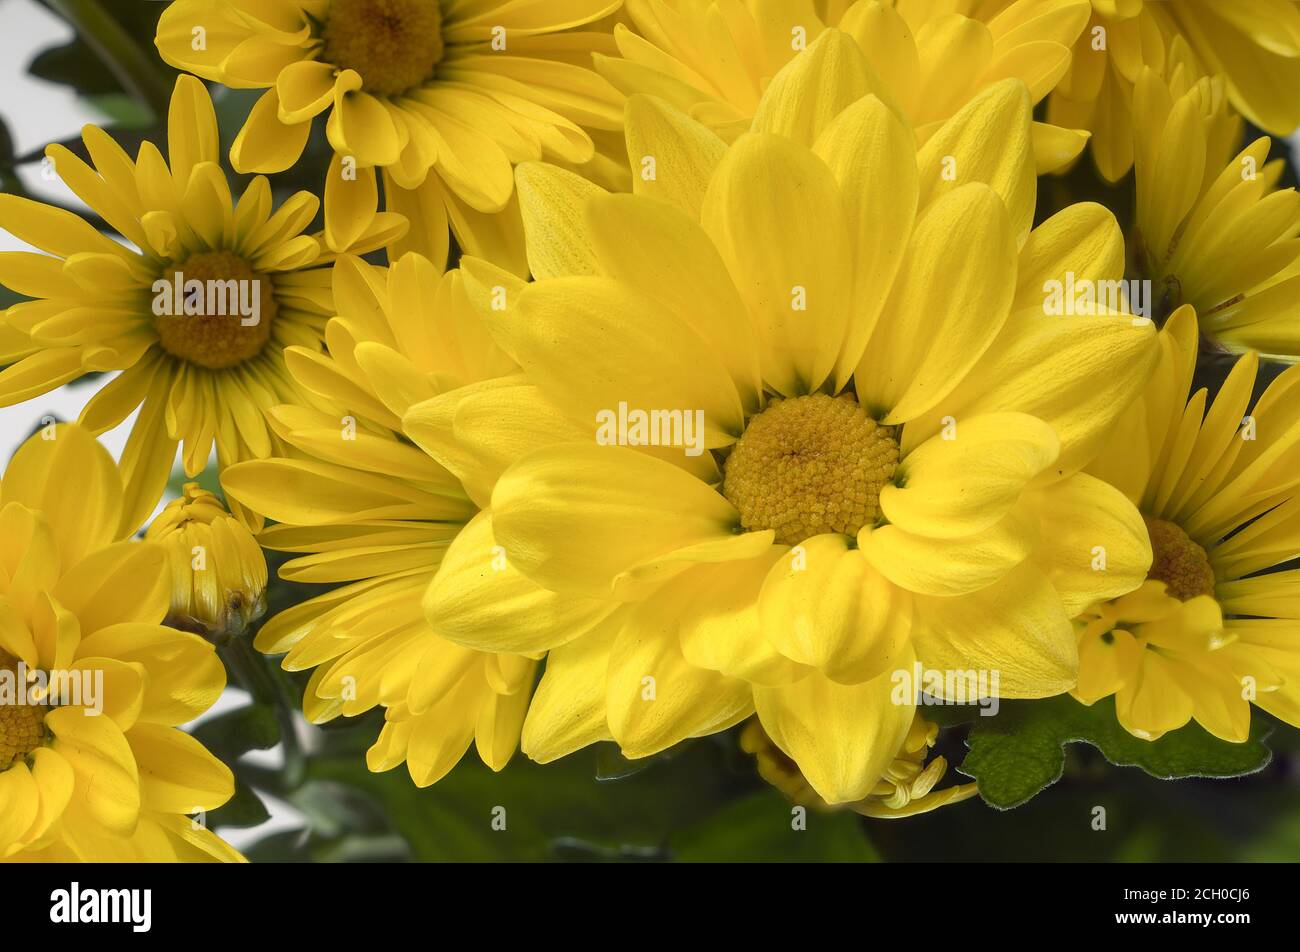 Chrysanthemum indicum - a bouquet of tiny yellow flowers that bloom nicely against a bright background, photographed at close range Stock Photo